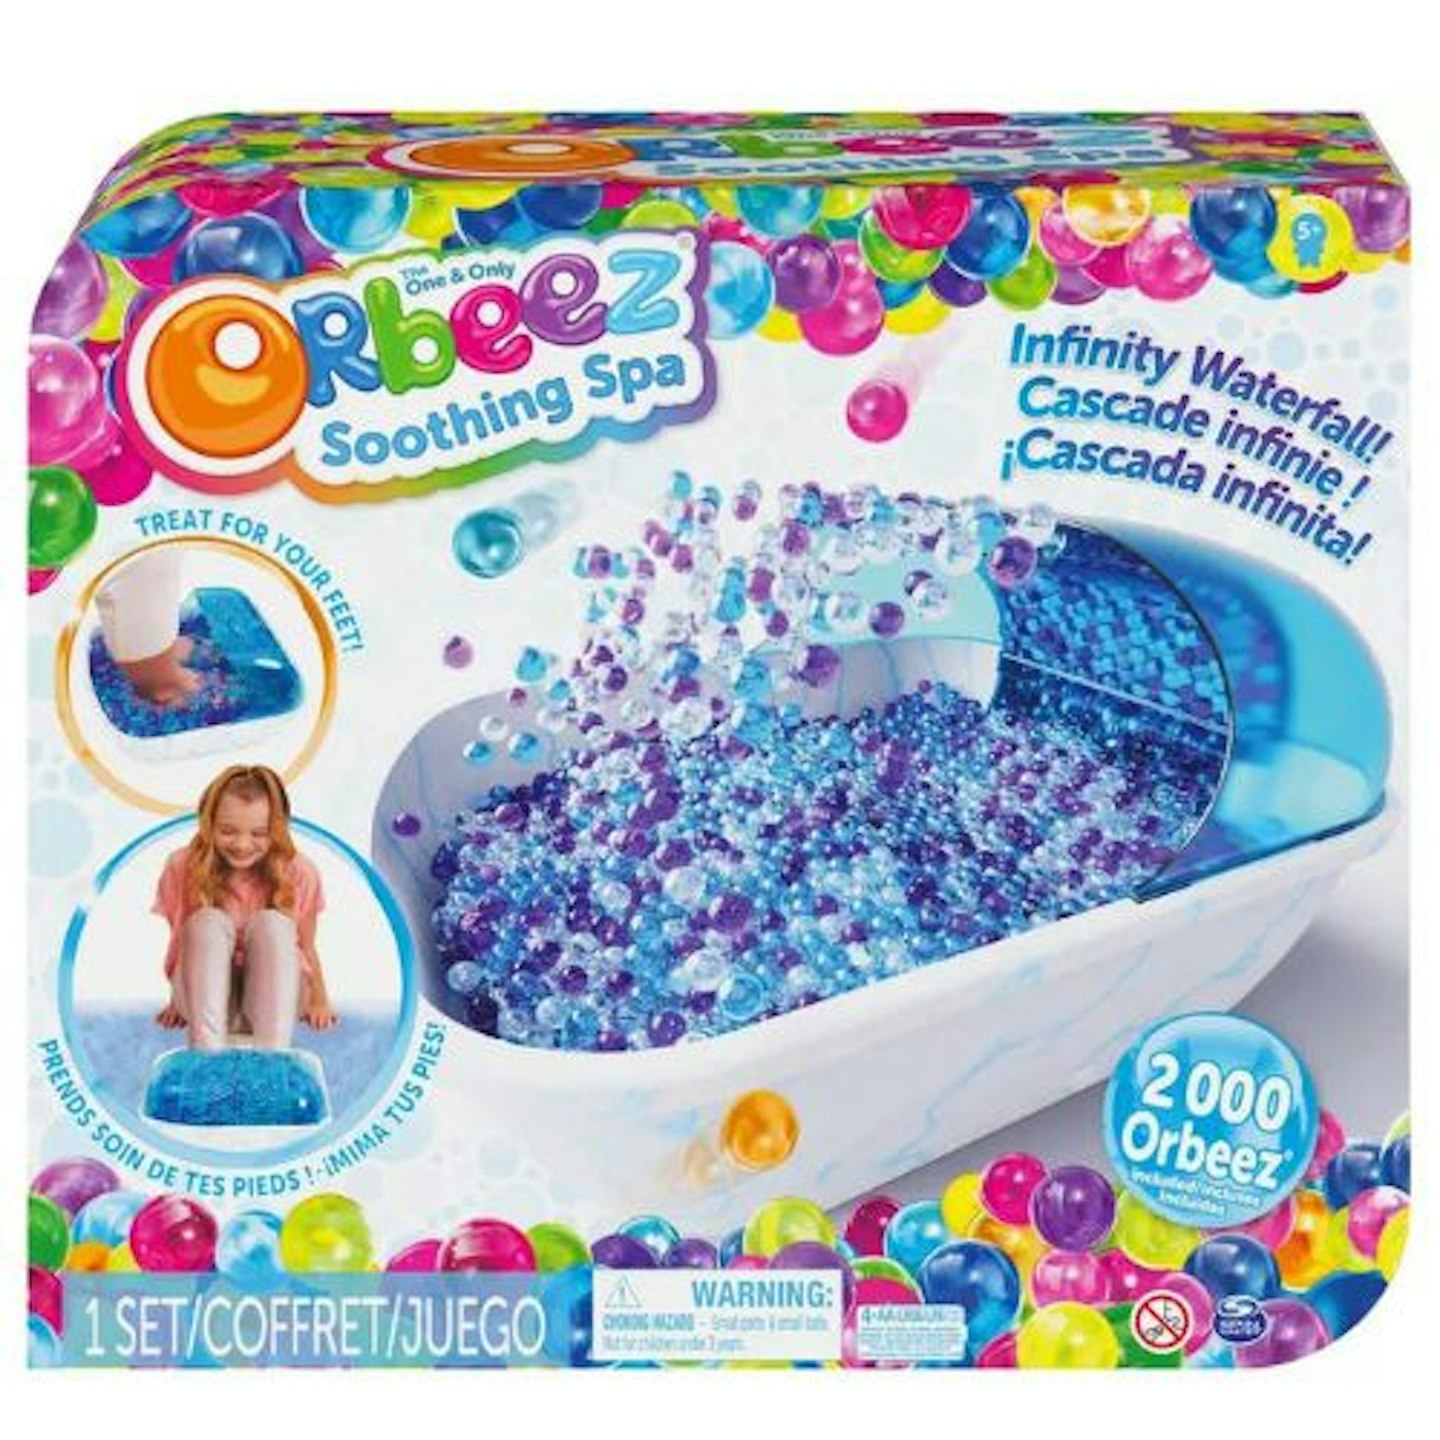 Water Beads Shouldn't Be a Child's Toy - Decipher Your Health